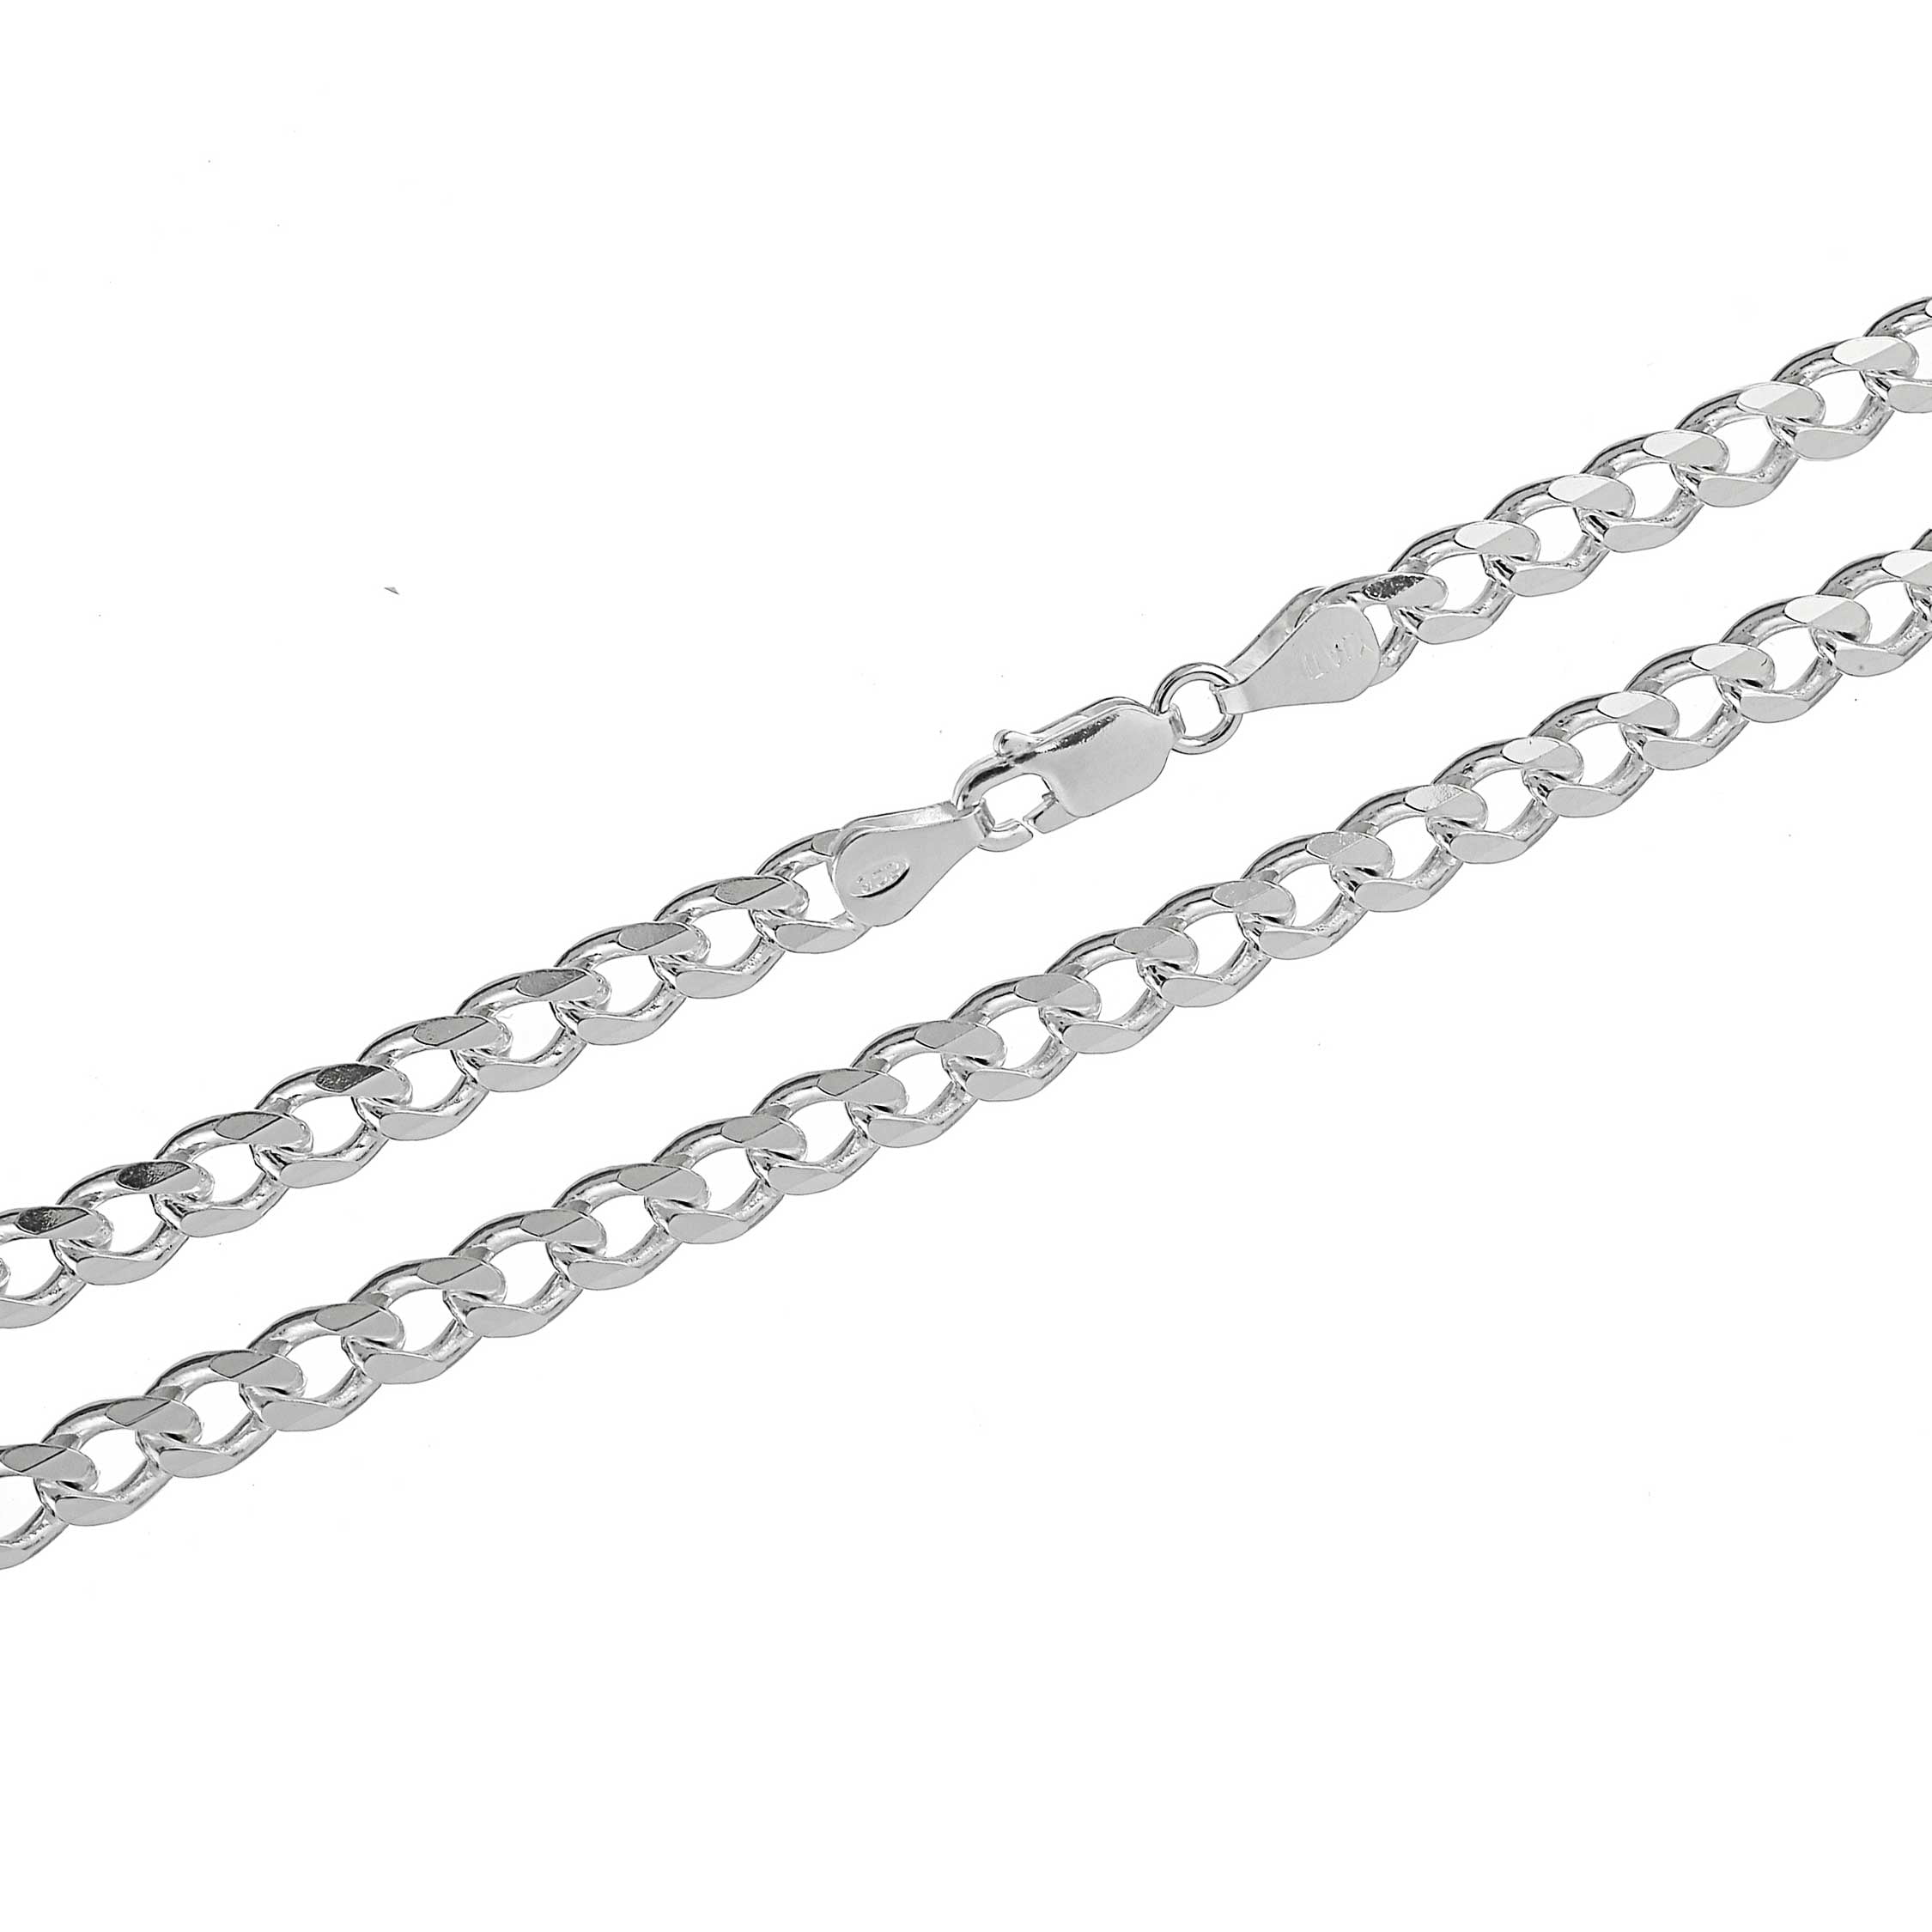 Men's Sterling Silver Curb Chain Necklace 5.5mm Cuban Link Made in Italy  5.5mm 22 inch